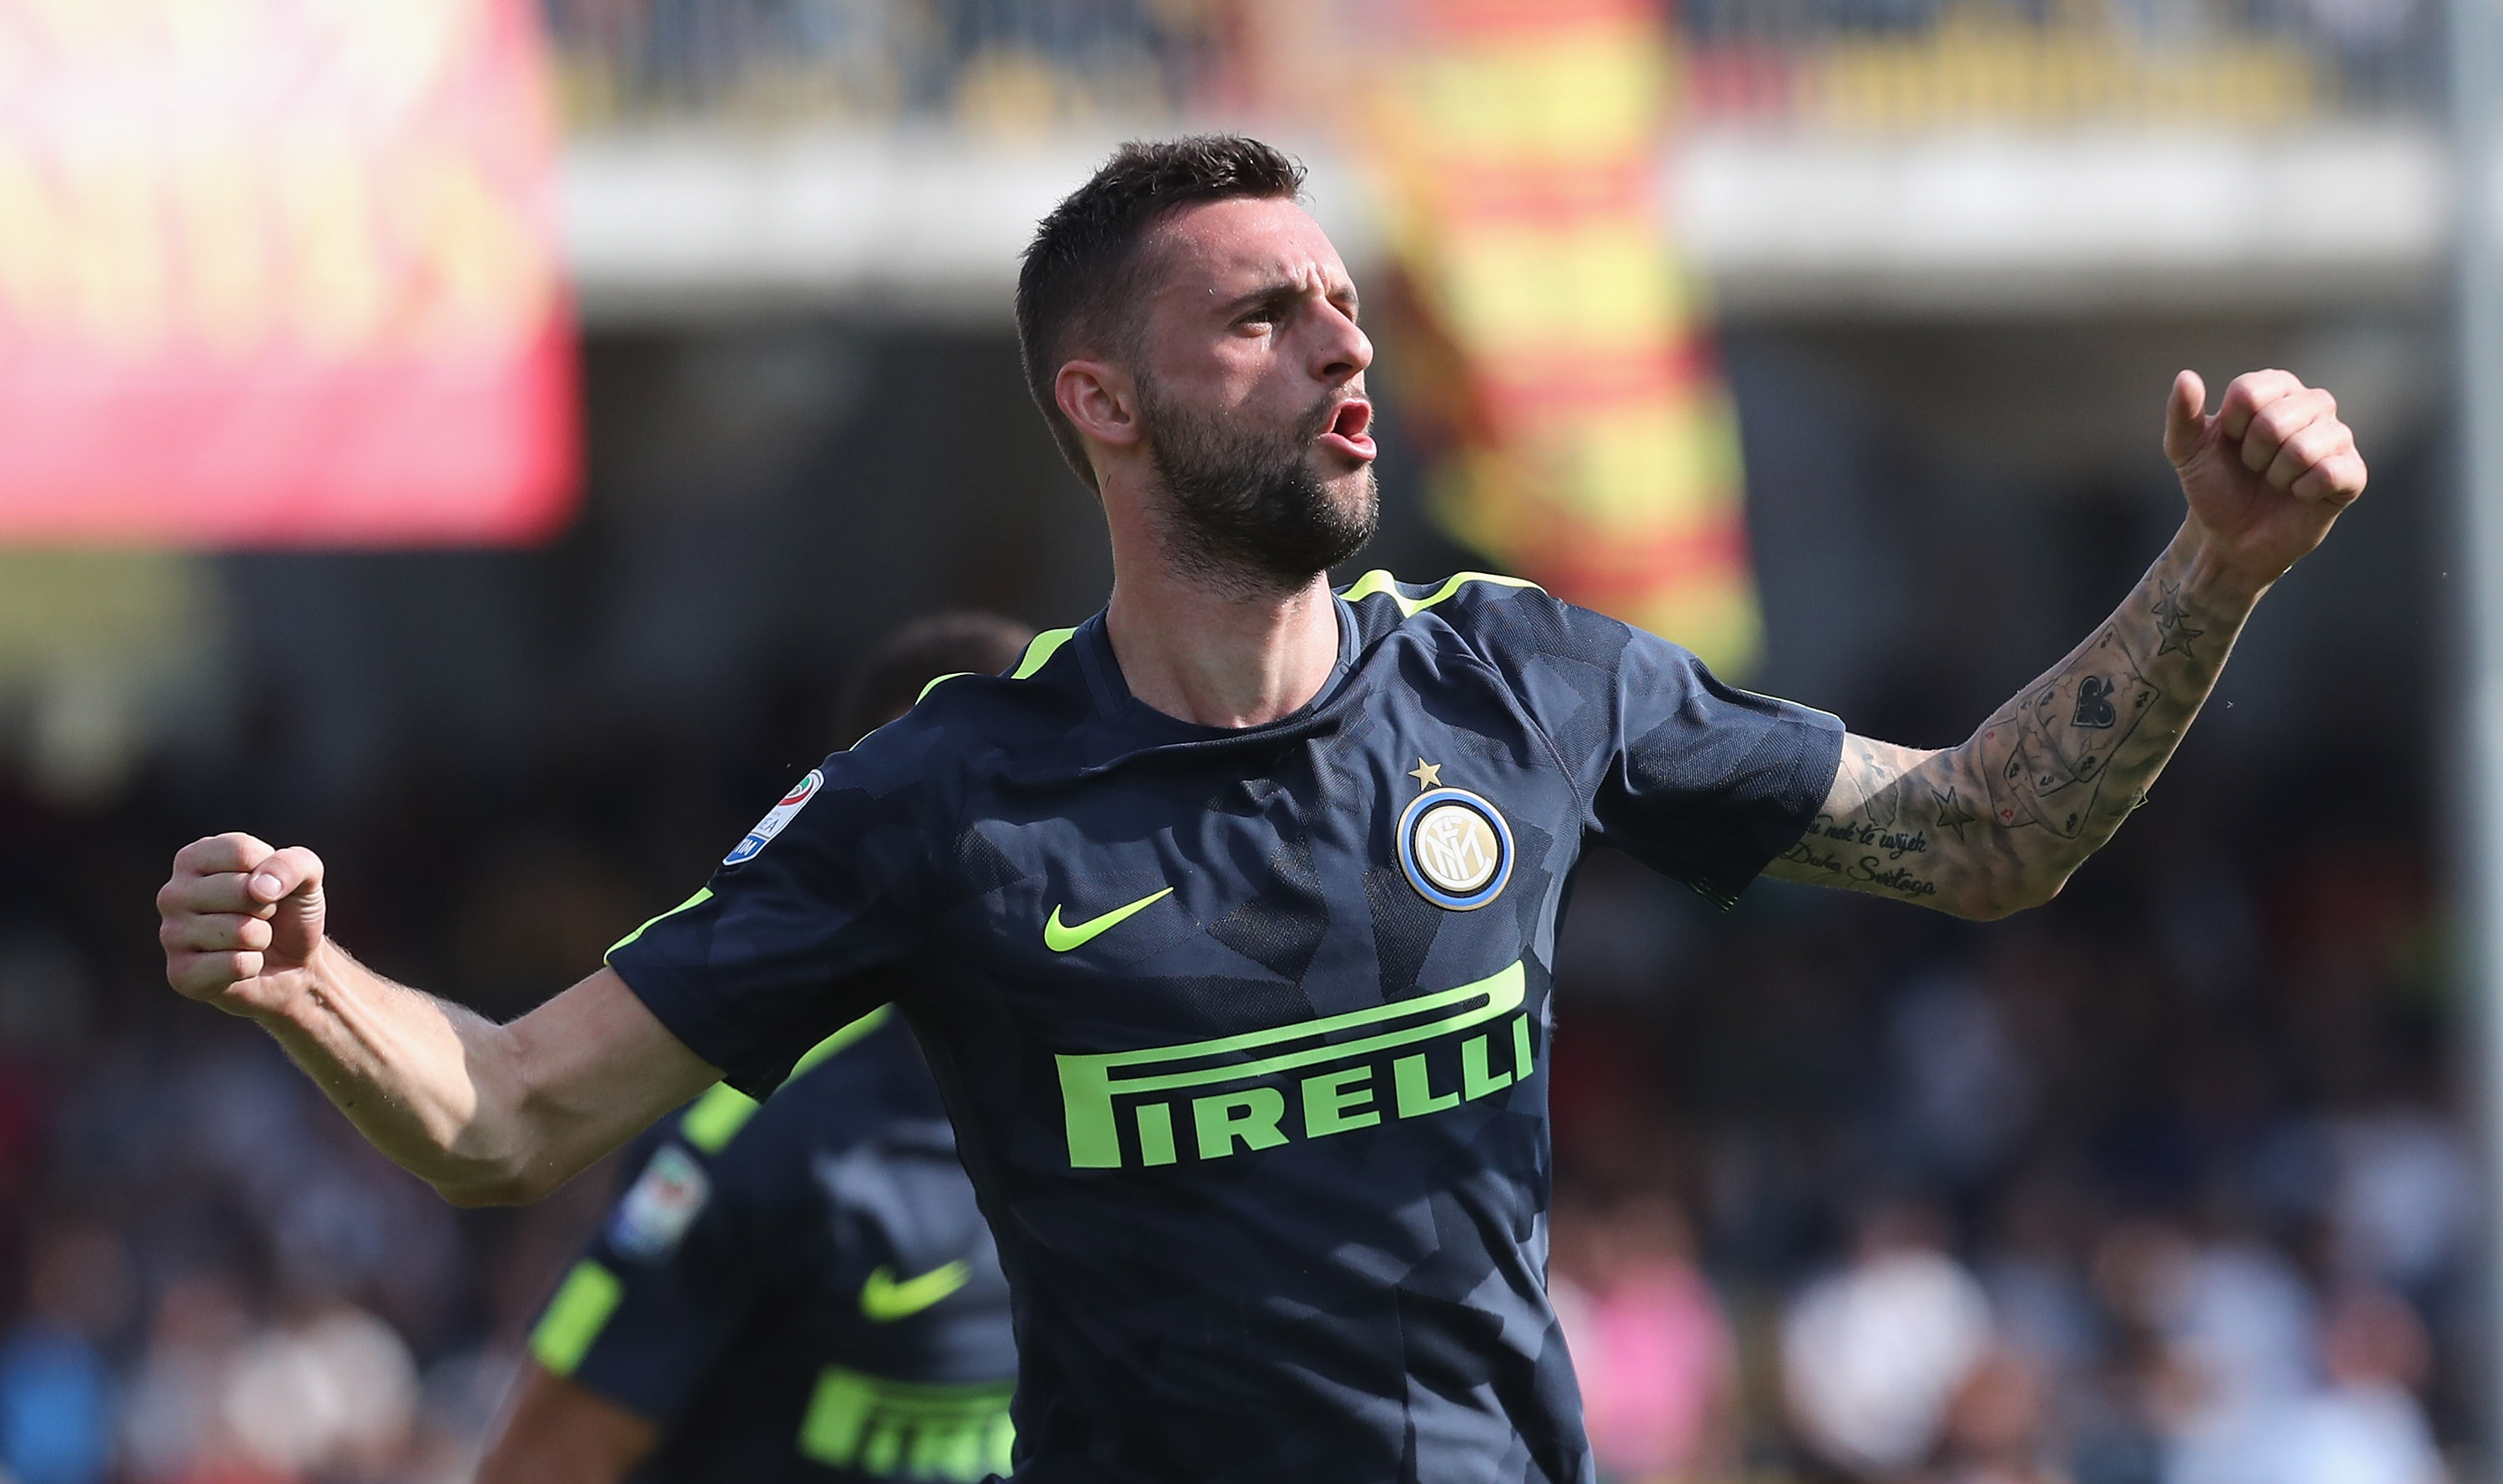 BENEVENTO, ITALY - OCTOBER 01:  Marcelo Brozovic of Inter celebrates after scoring his team's second goal during the Serie A match between Benevento Calcio and FC Internazionale at Stadio Ciro Vigorito on October 1, 2017 in Benevento, Italy.  (Photo by Maurizio Lagana/Getty Images)